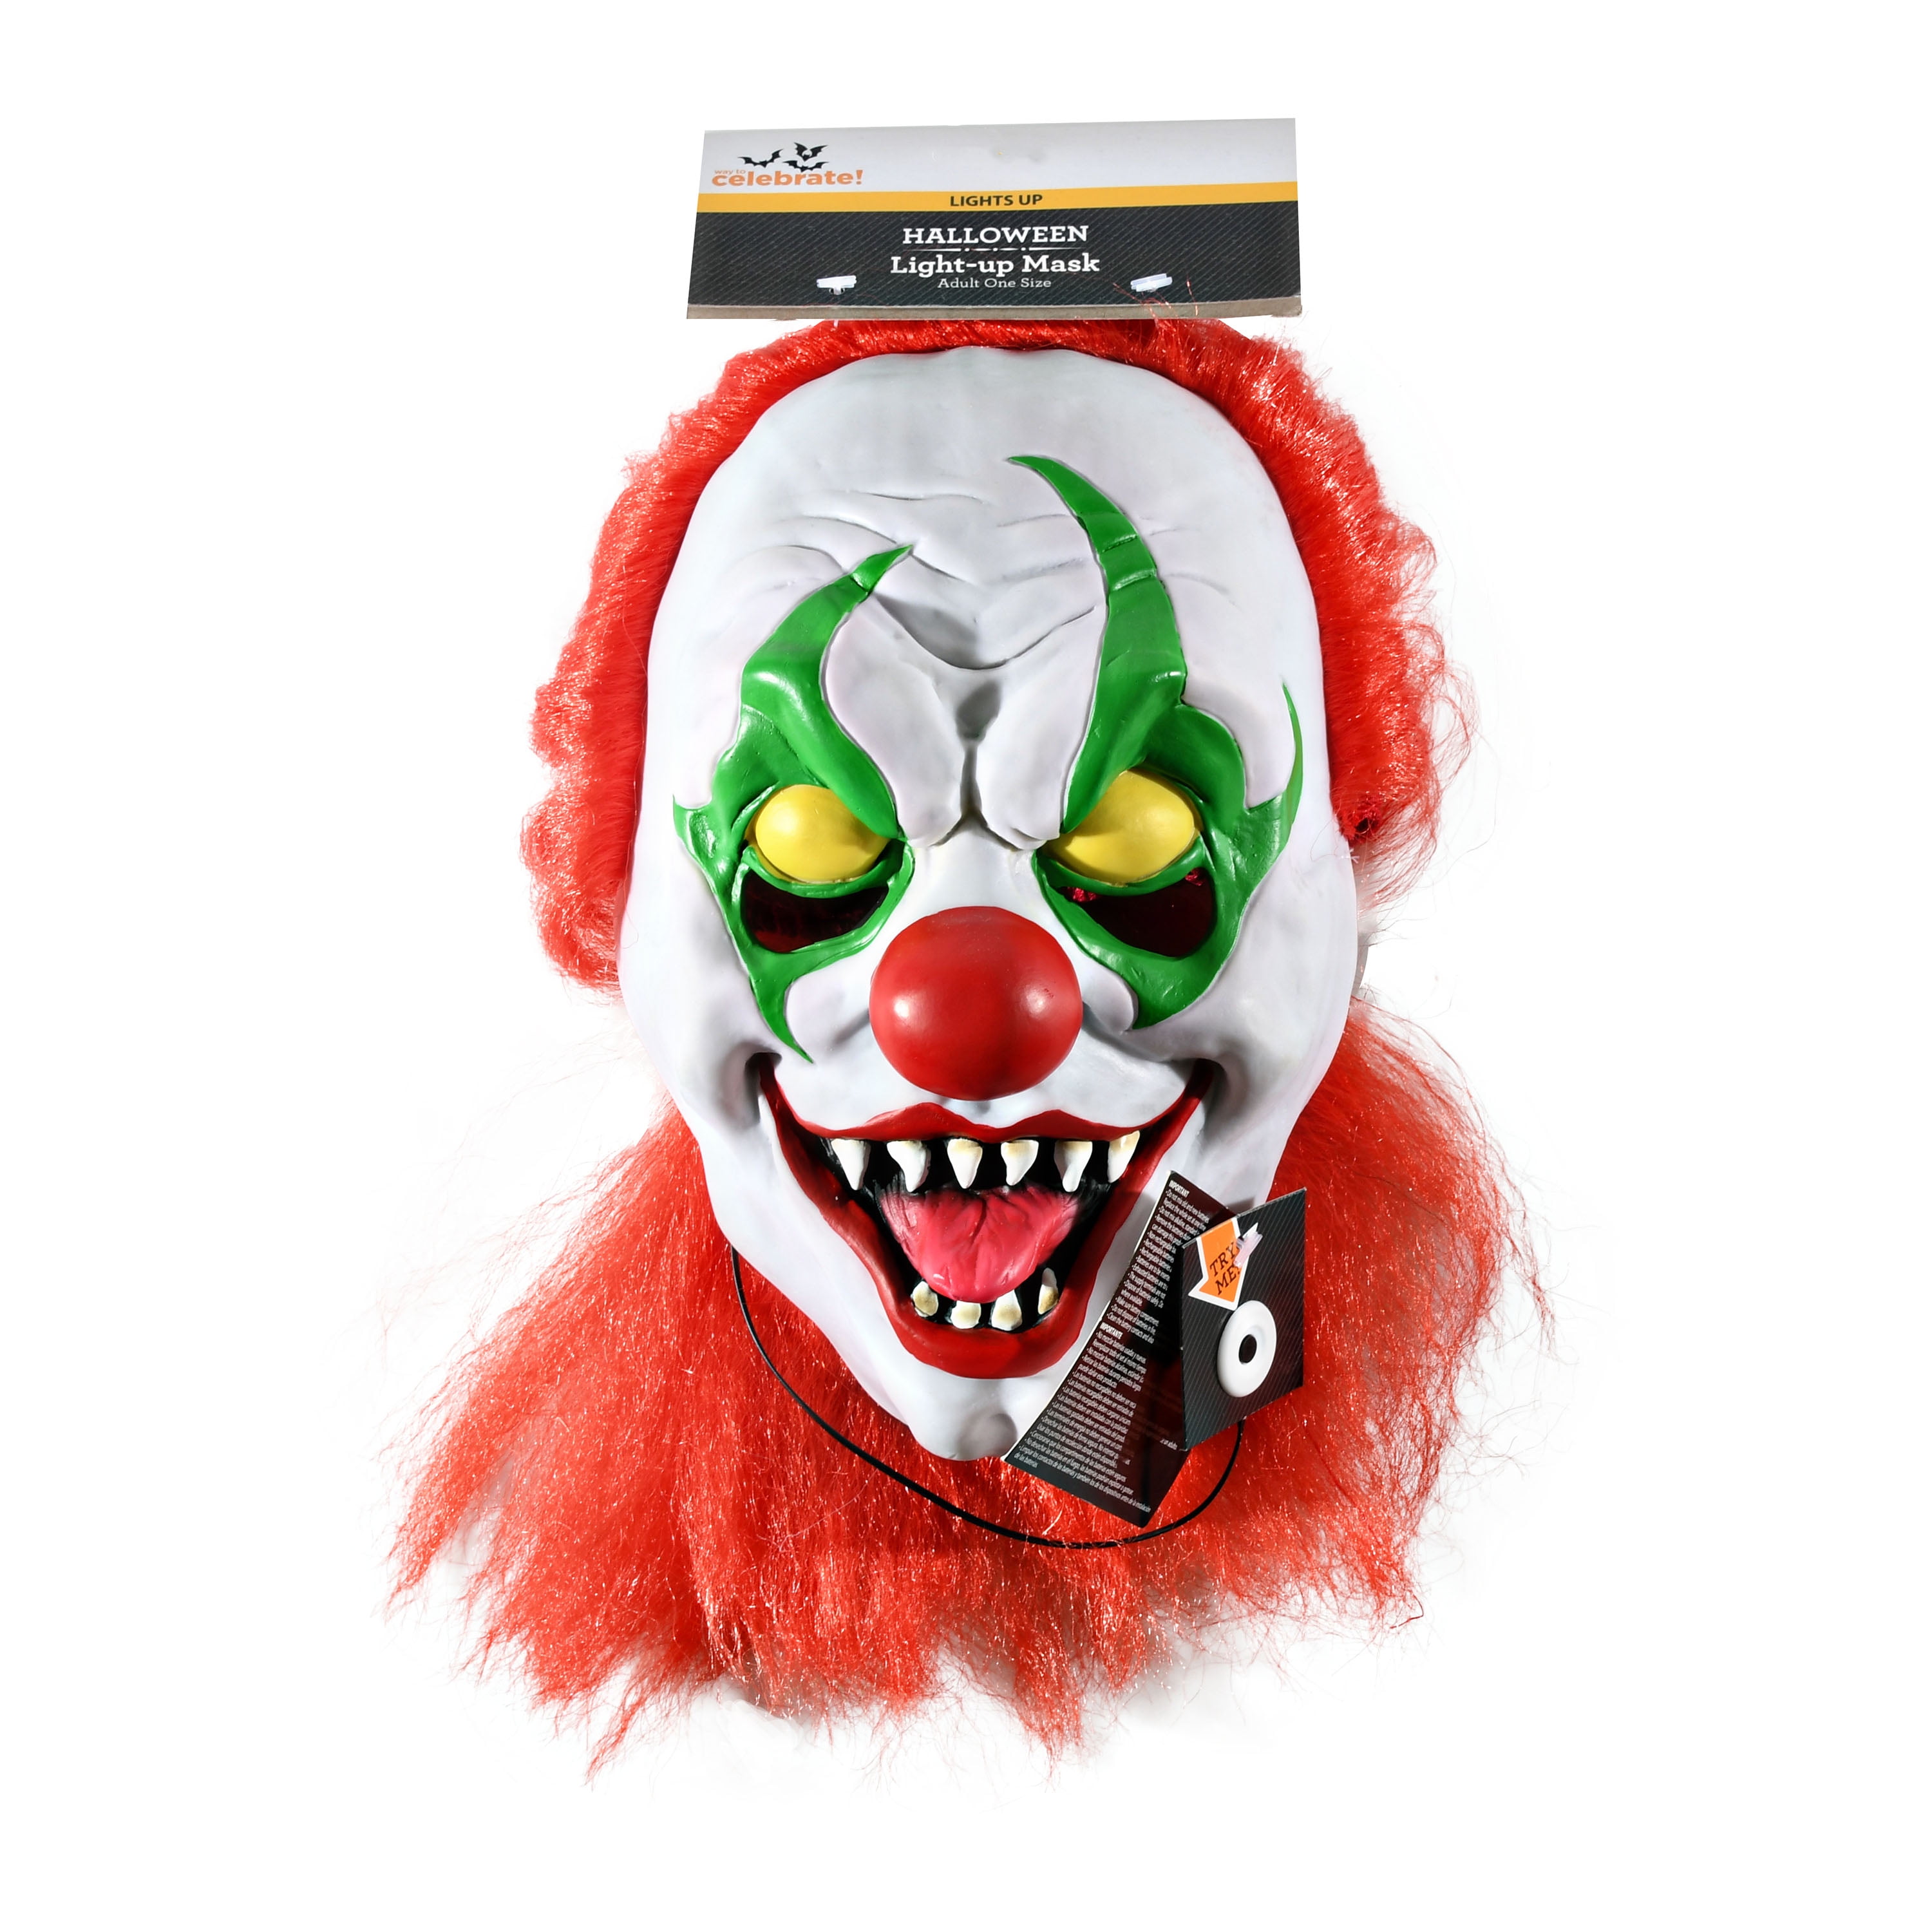 GIGGLES THE CLOWN-LIGHT UP EYES BUST STATUE not a bobblehead figure LIGHTED LED 